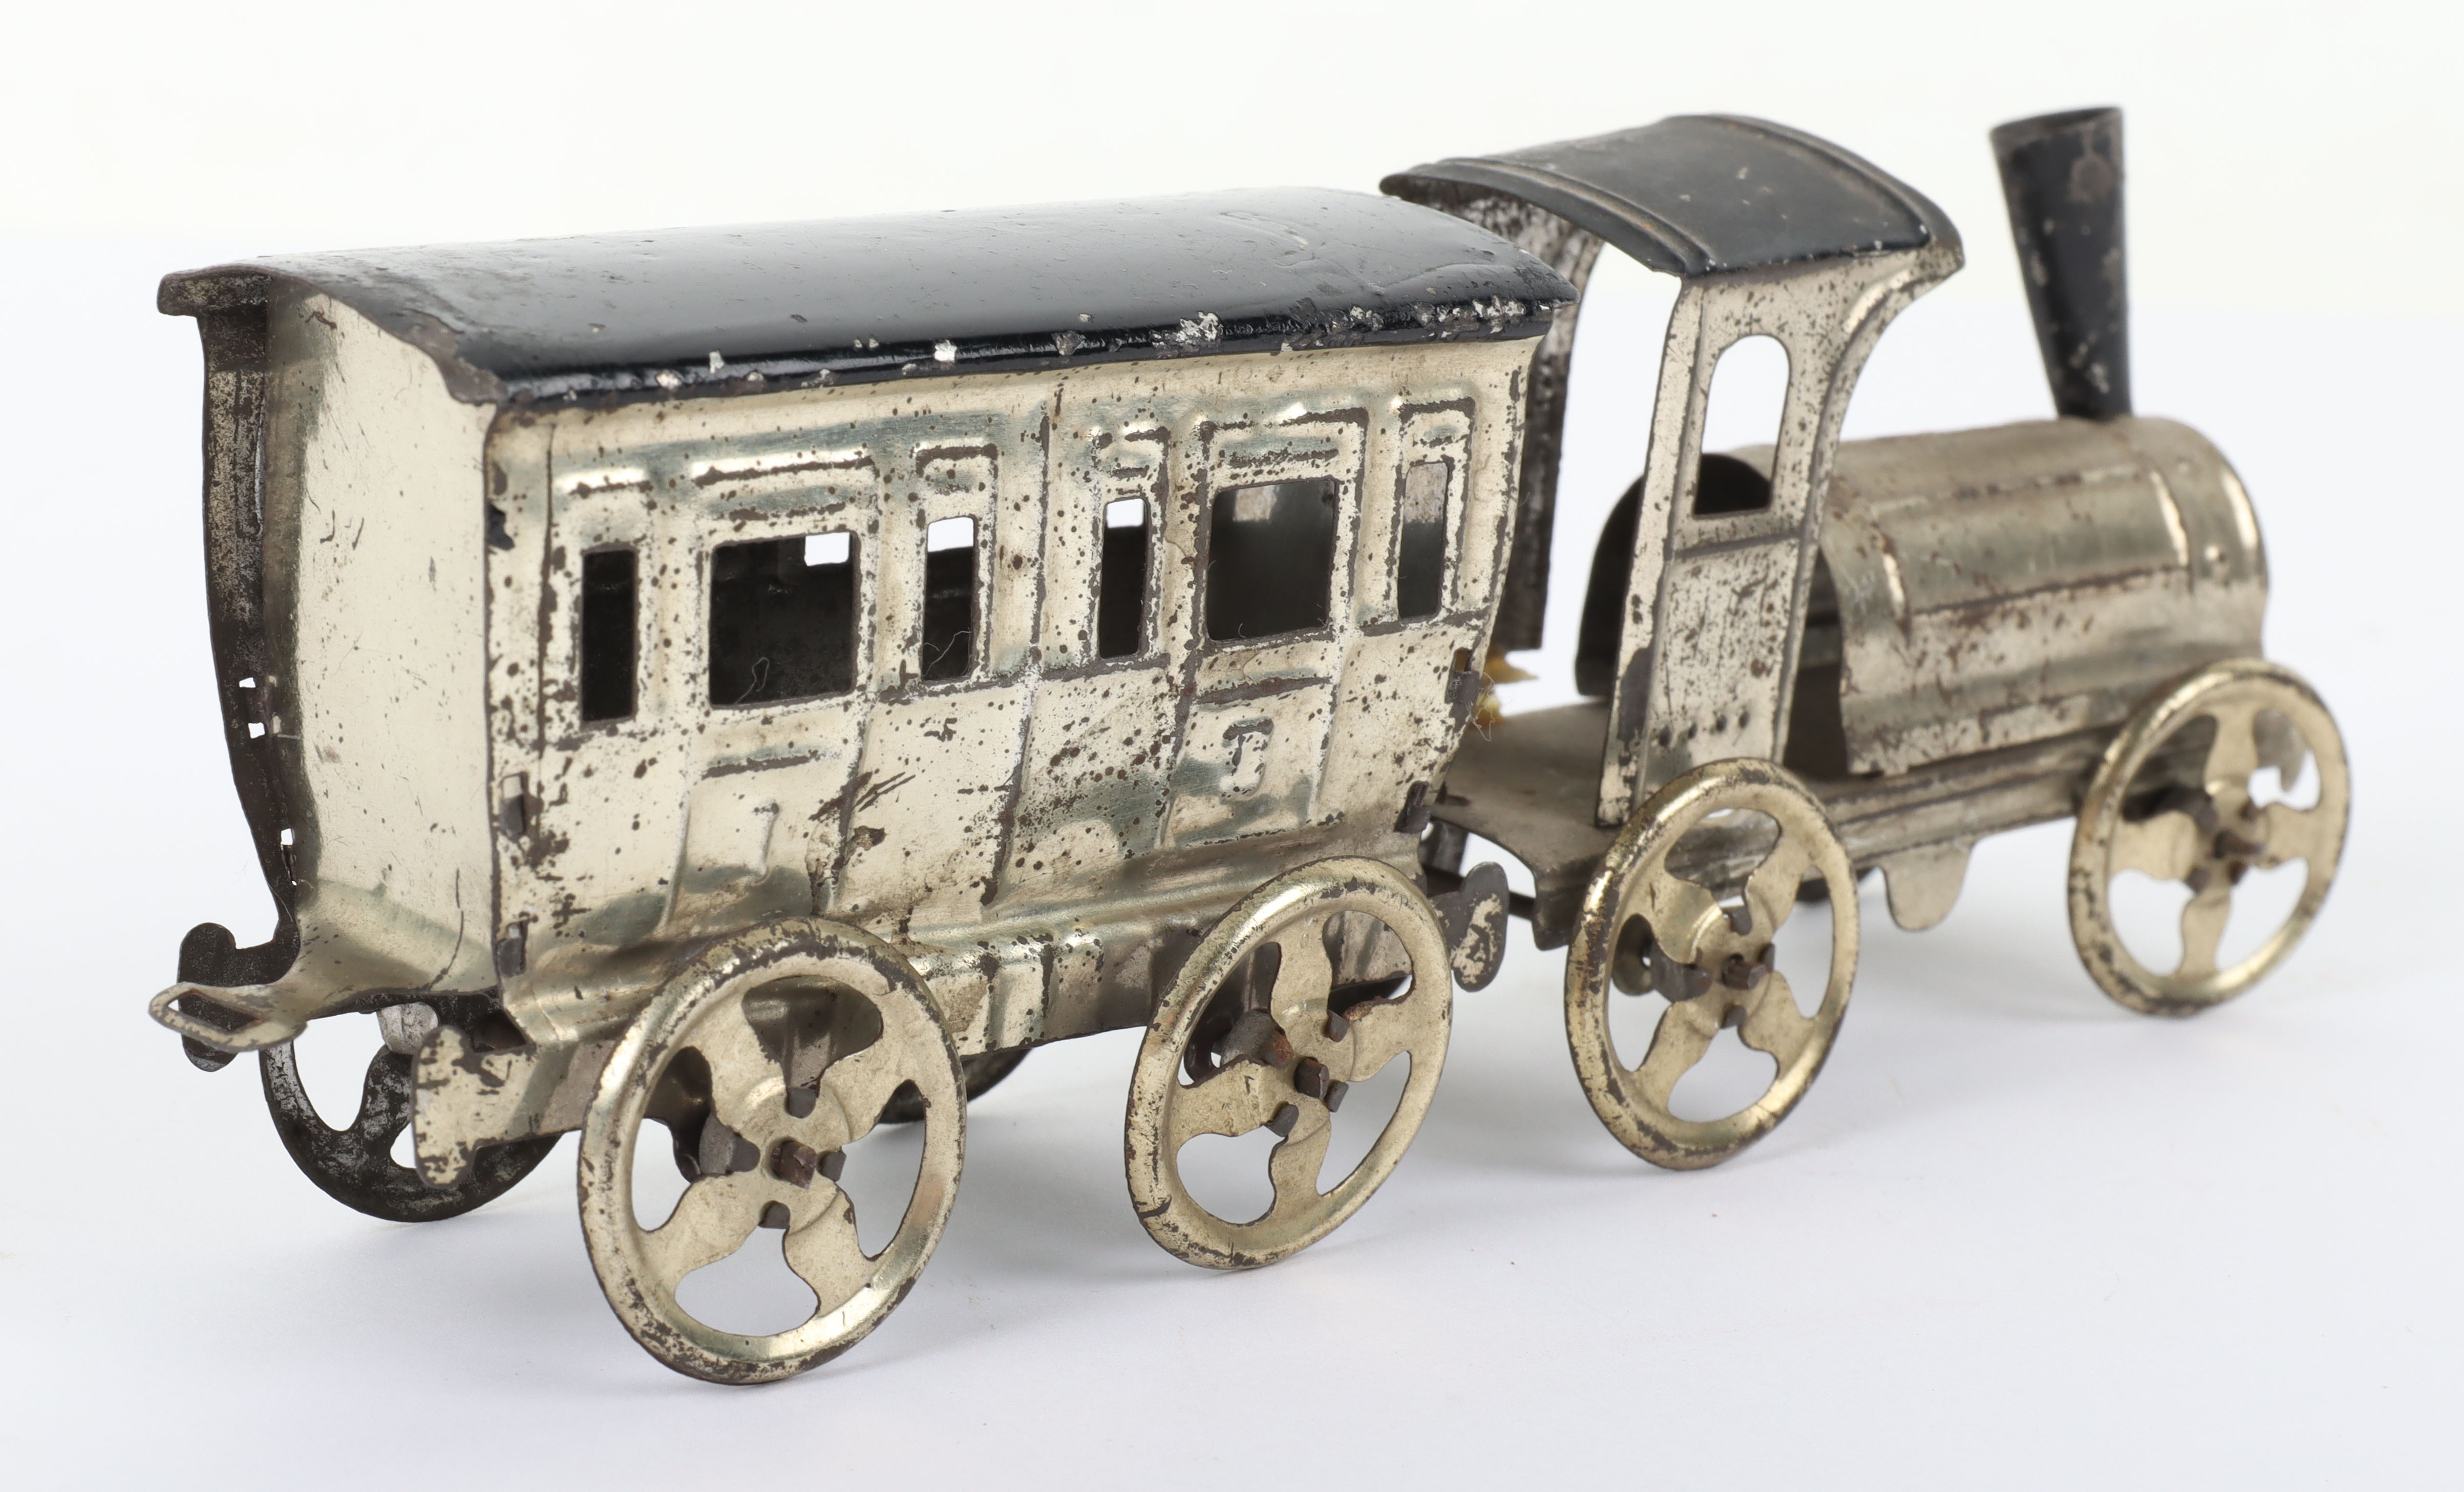 Early Meier pressed tinplate locomotive and carriage penny toy, German circa 1900 - Image 4 of 6